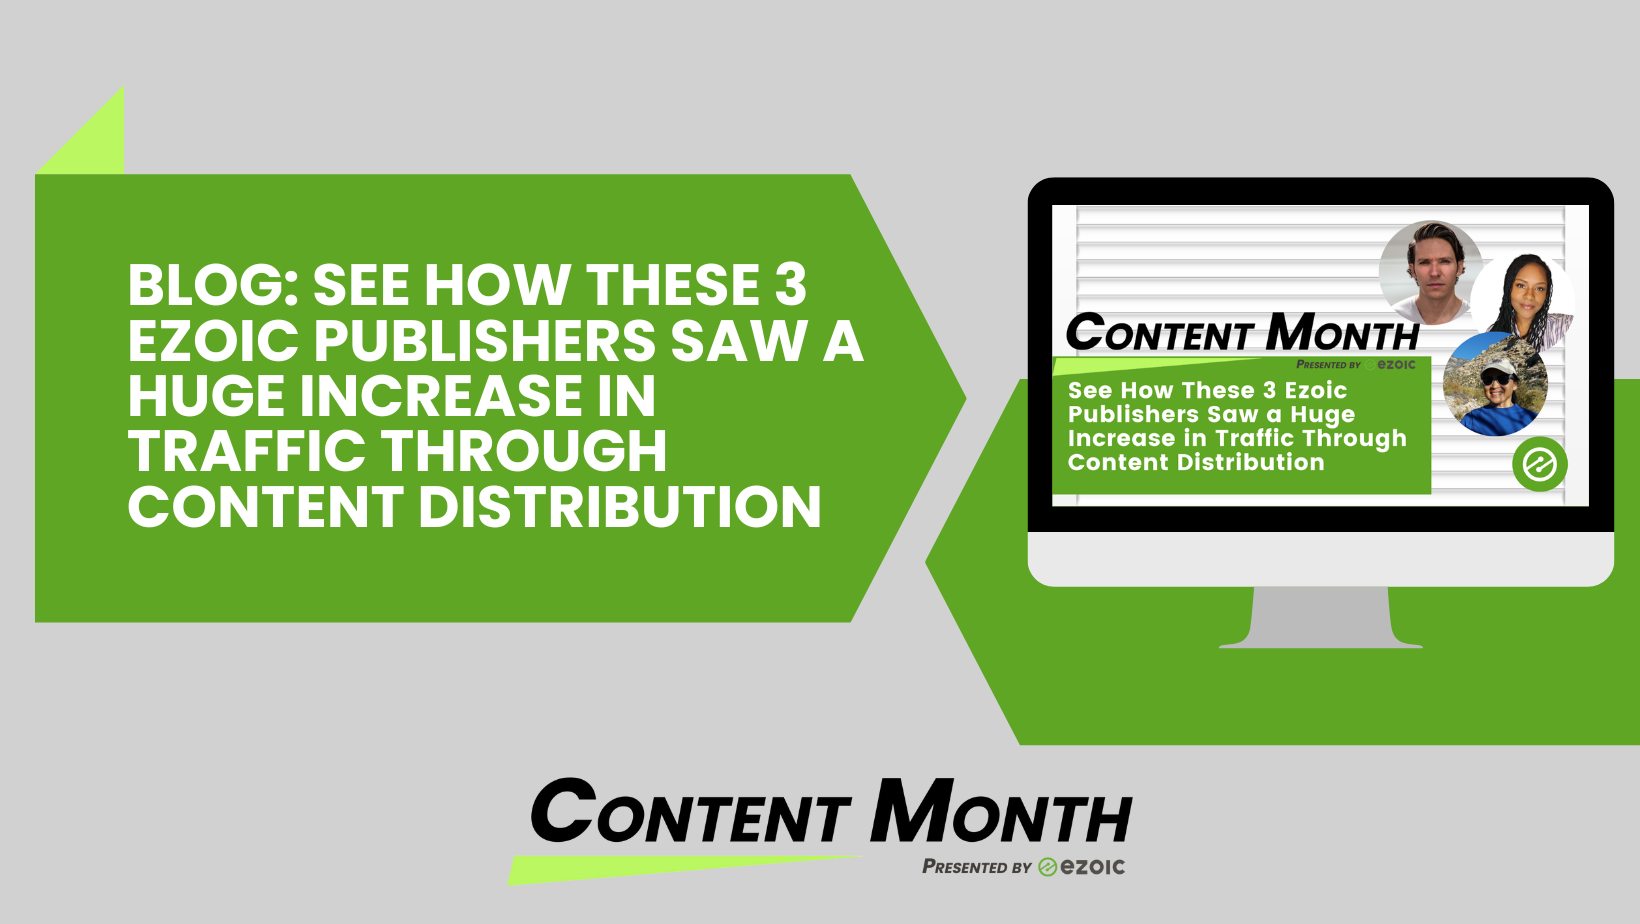 See How These 3 Ezoic Publishers Saw a Huge Increase in Traffic Through Content Distribution